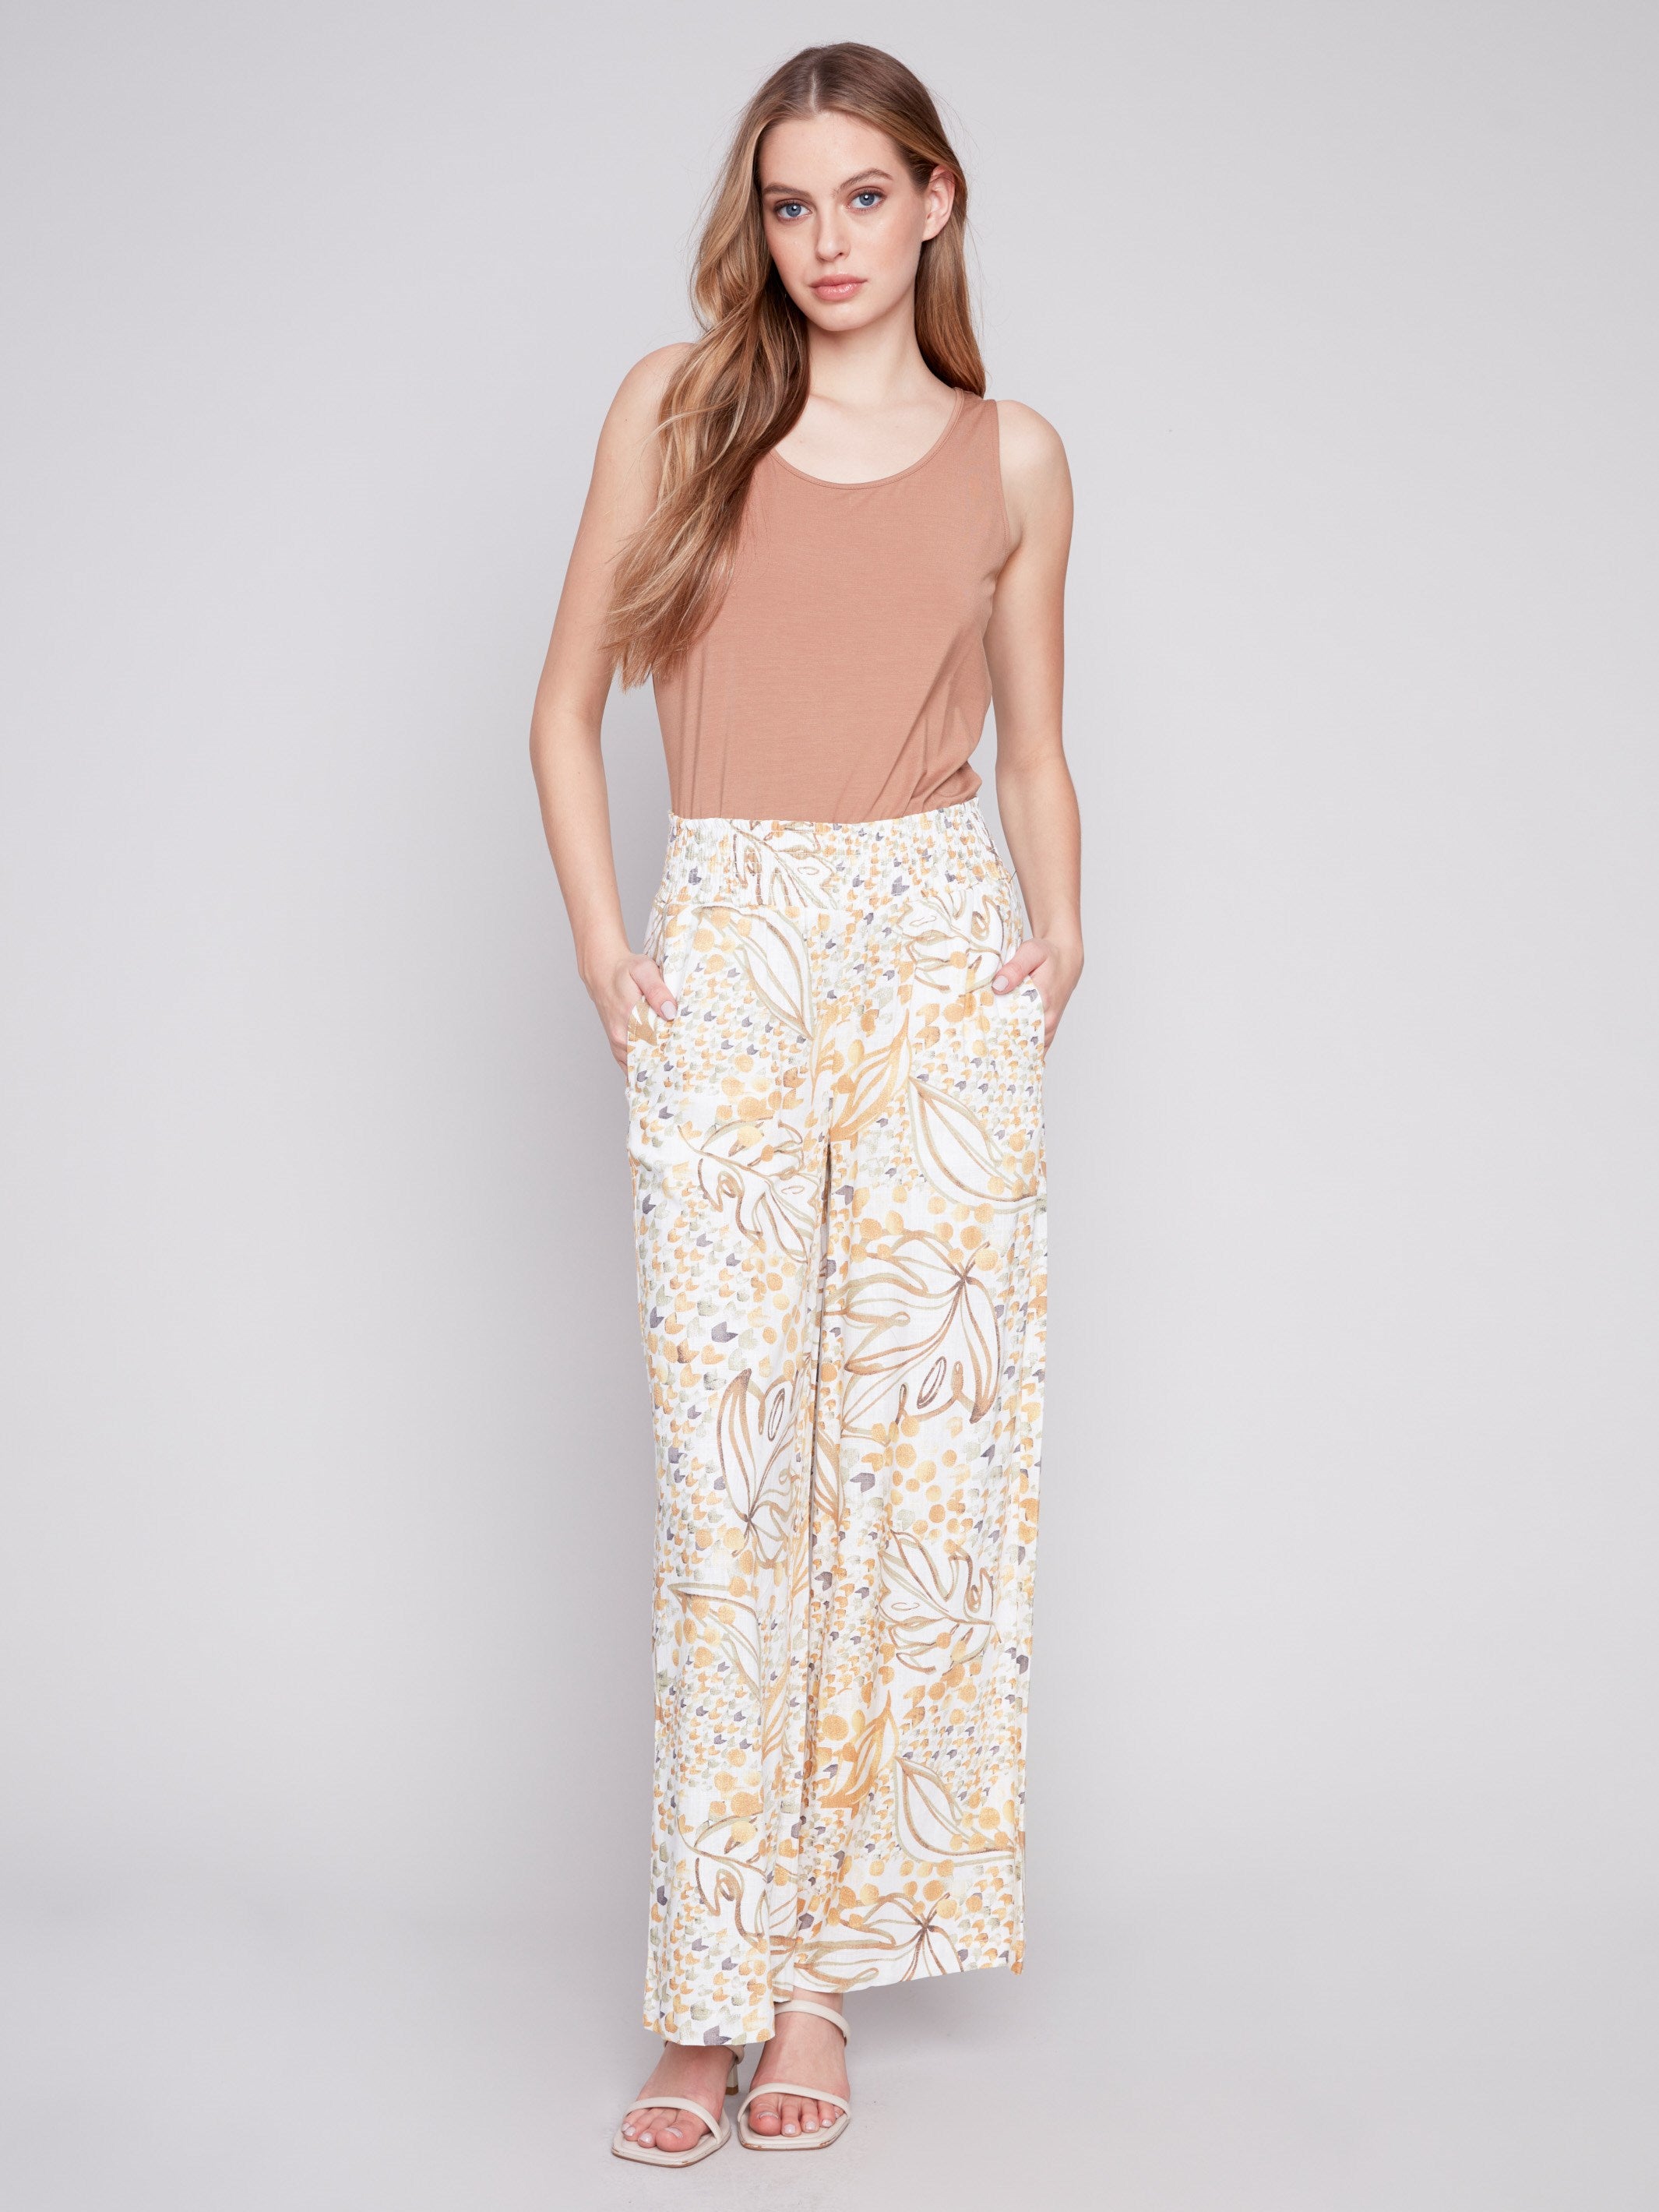 Printed Elastic Waist Pull-On Pants - Dune - Charlie B Collection Canada - Image 1